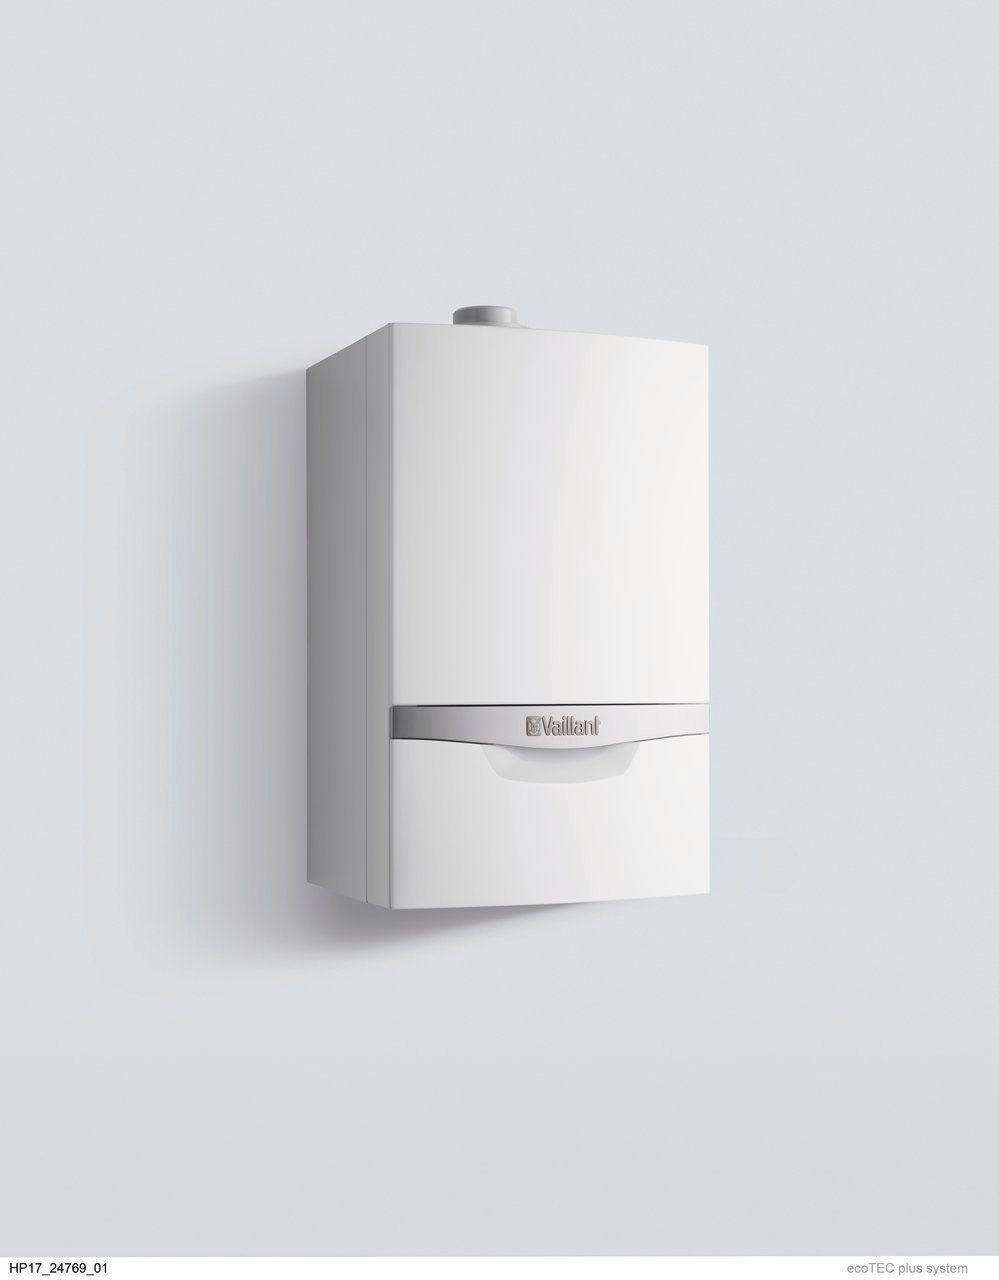 How to Improve Efficiency of Vaillant EcoTec Plus Boilers